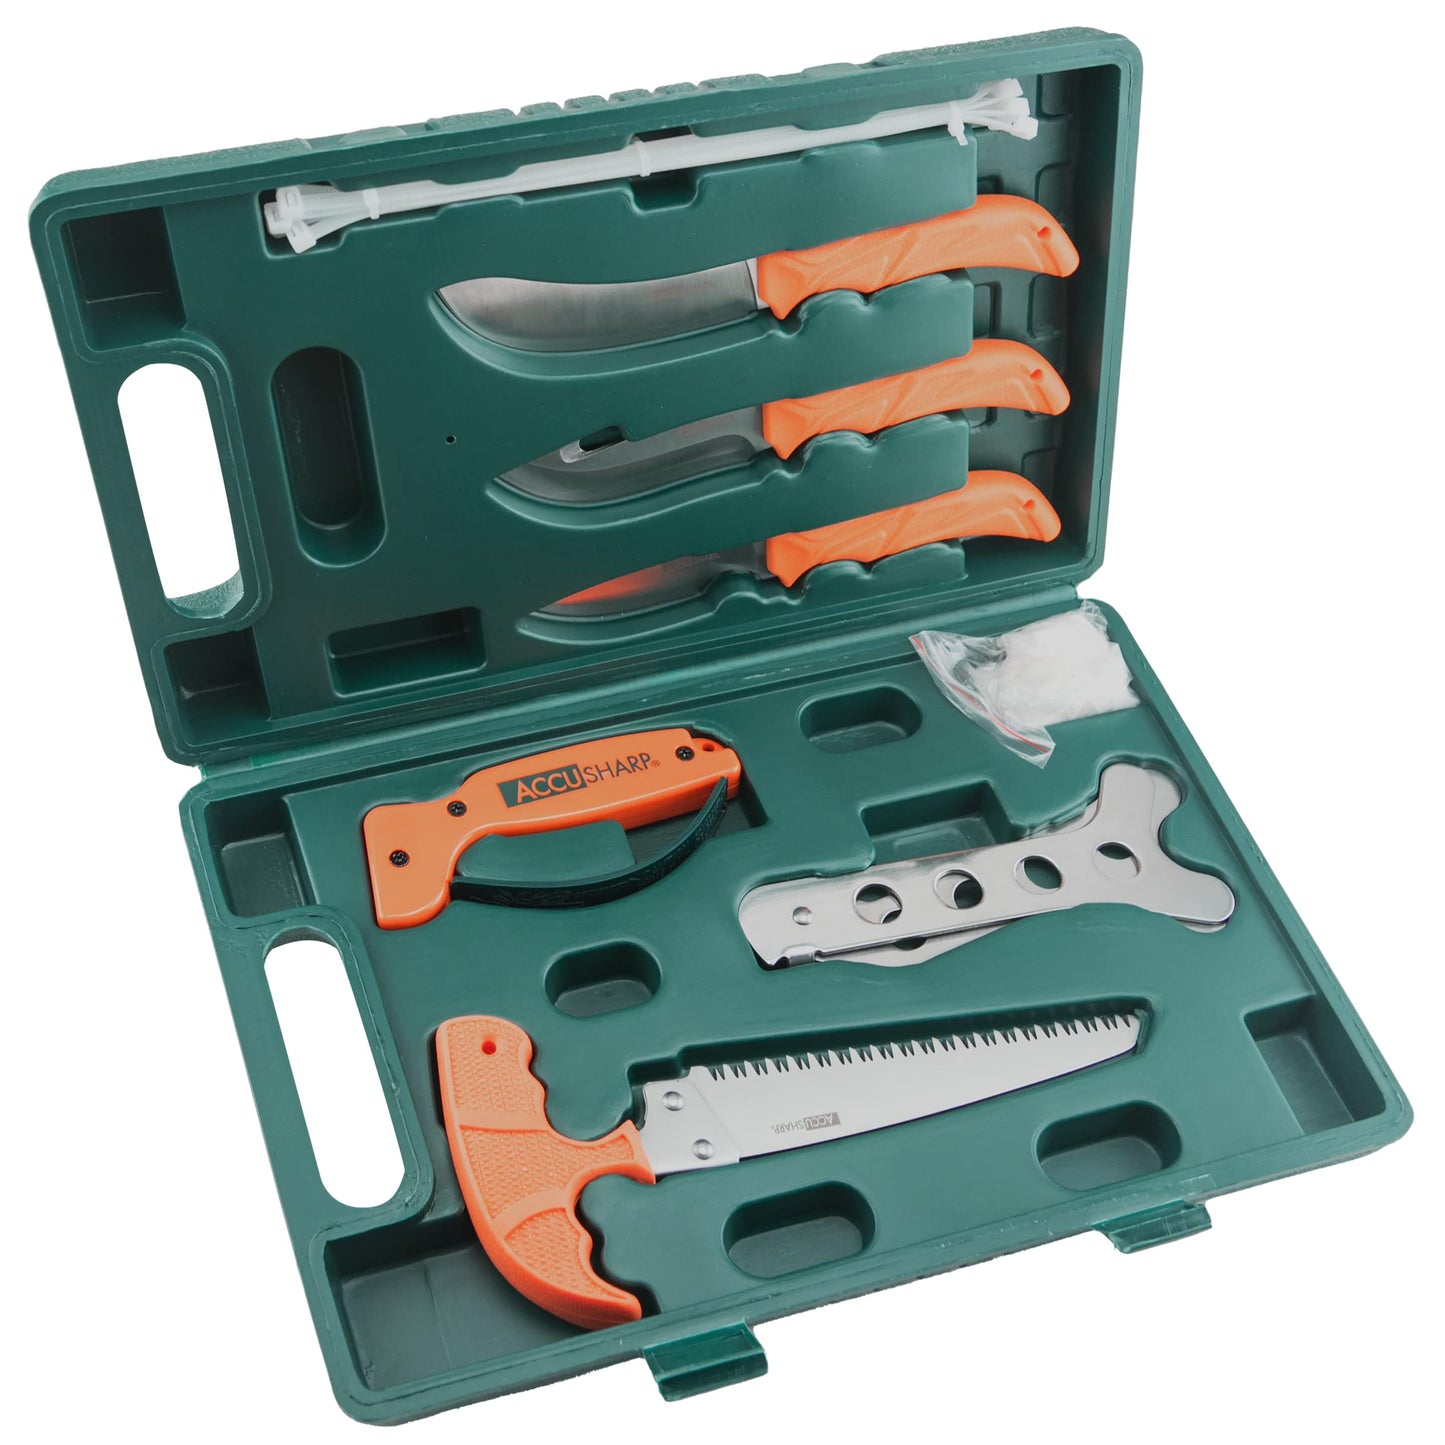 AccuSharp Hunting Kit - 9 Piece Processing Knife Kit with 3 Hunting Knives, Bone Saw, Ribcage Spreader, Zip Ties, Gloves and Knife Sharpener - Complete Field Dressing Kit with Case